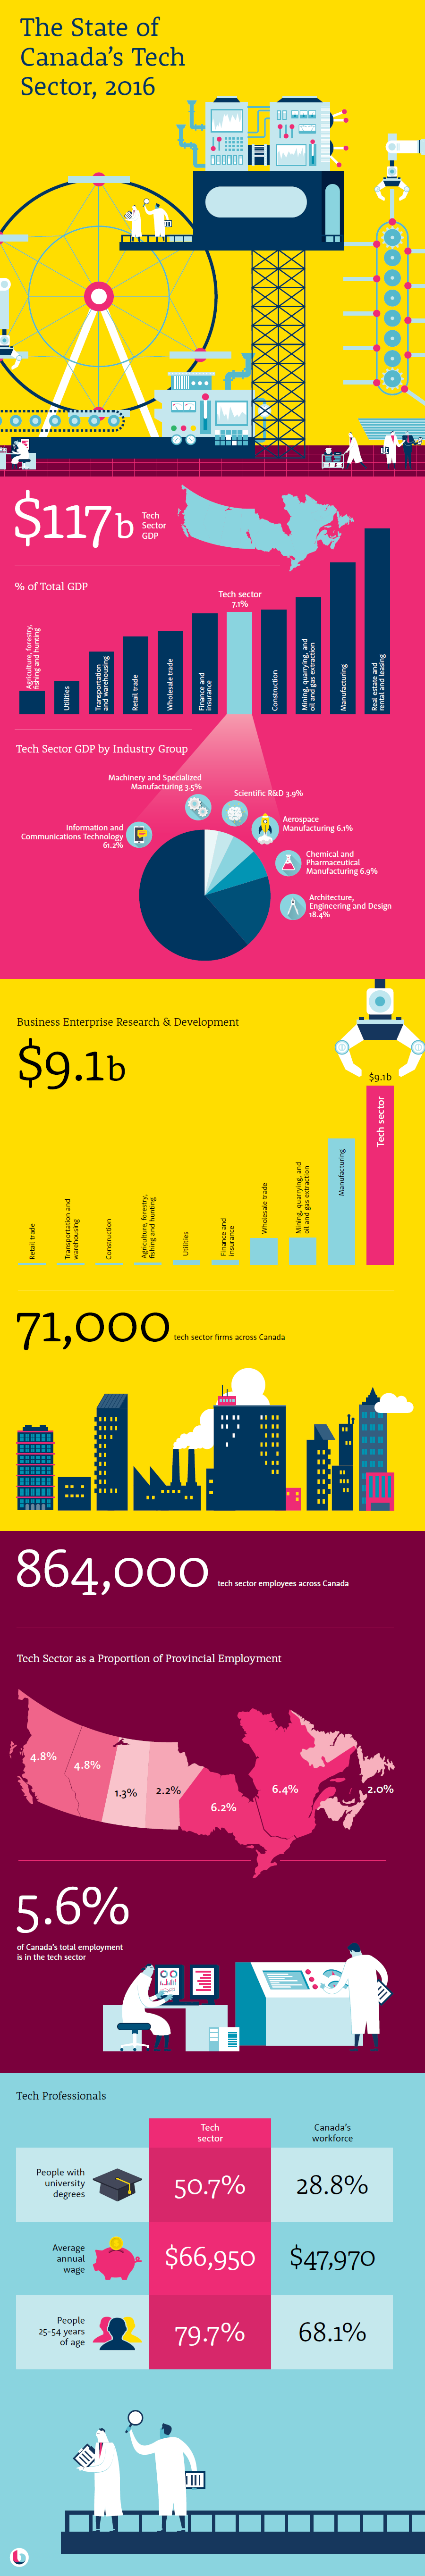 State of Canada's tech sector infographic